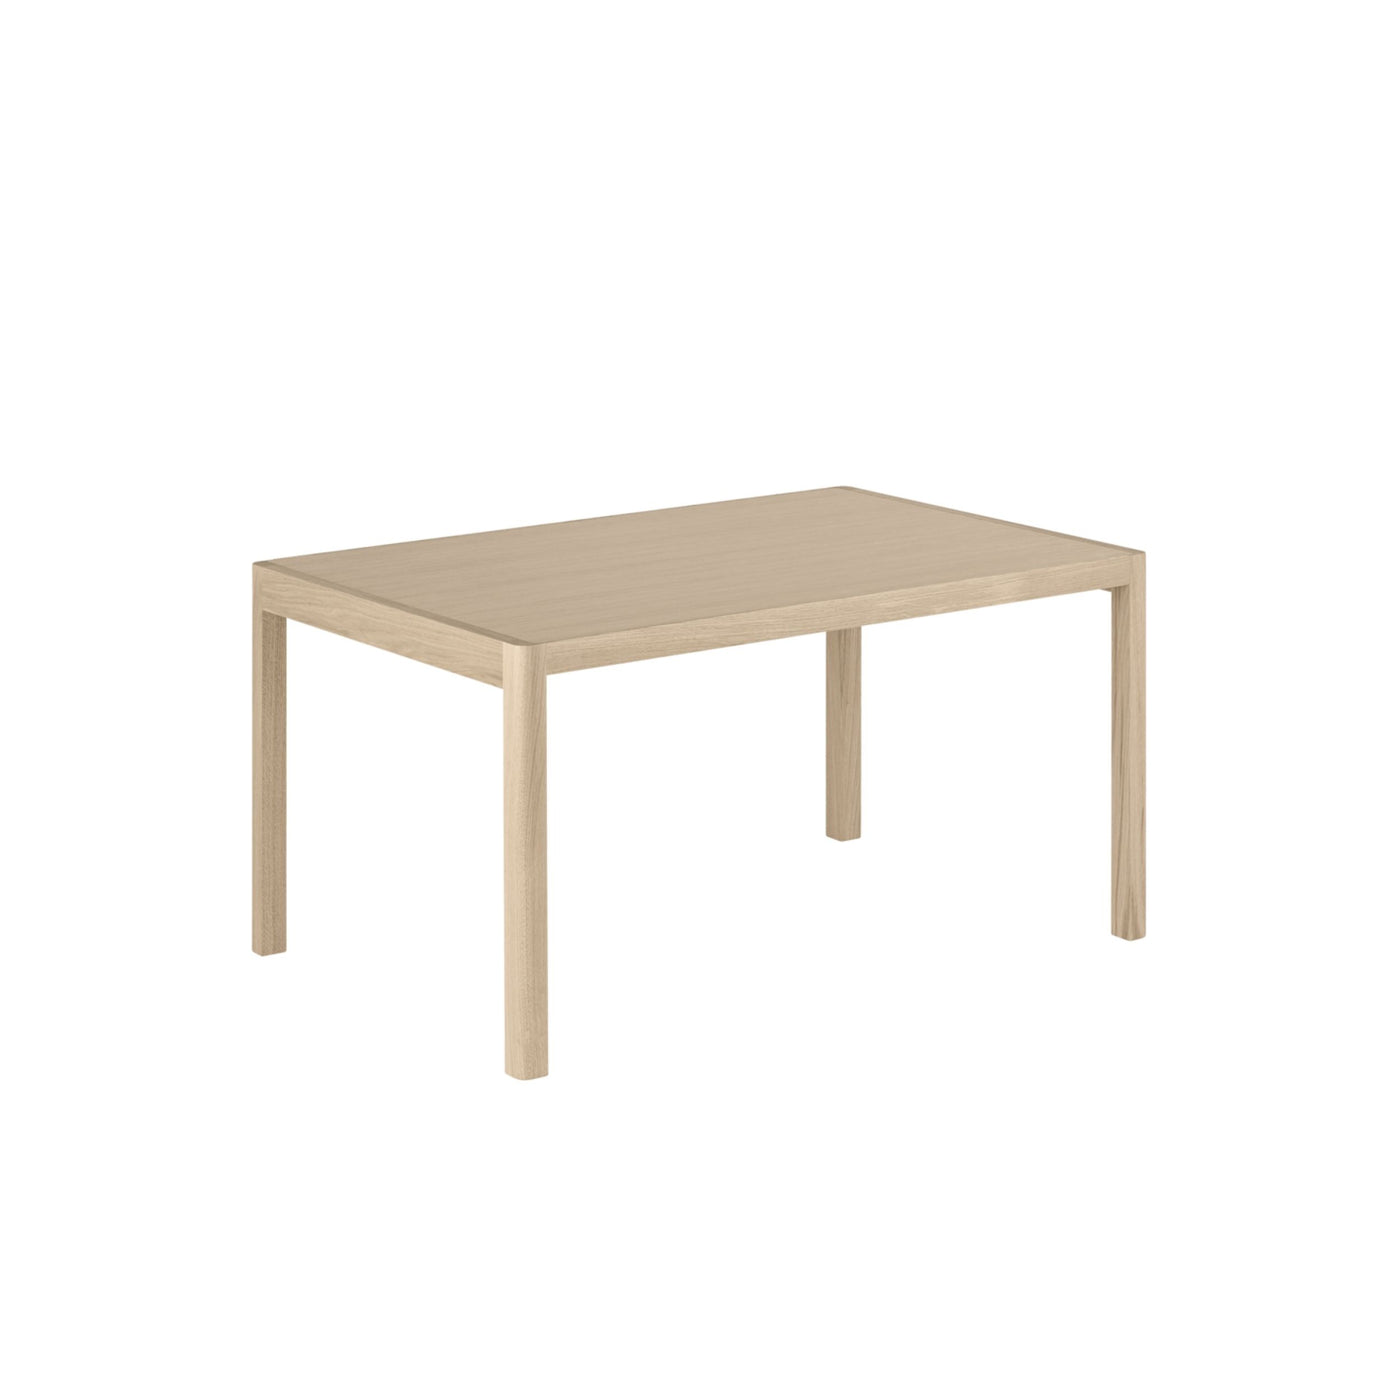 Muuto Workshop Table in oak. Shop online at someday designs.  #size_92x140